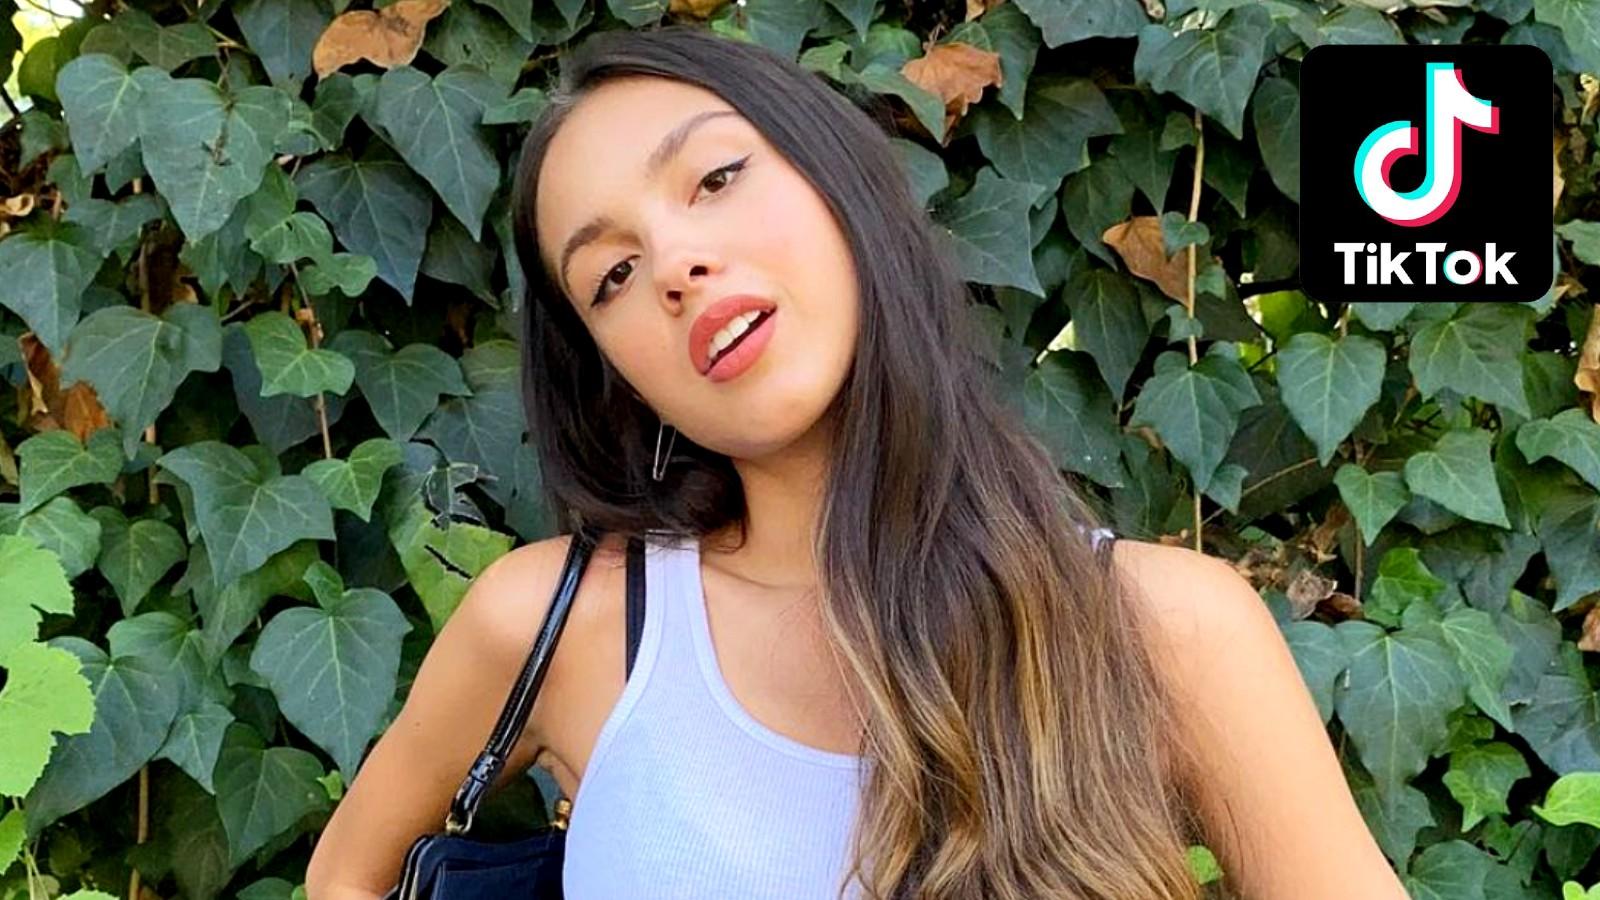 Olivia Rodrigo poses in front of some leaves